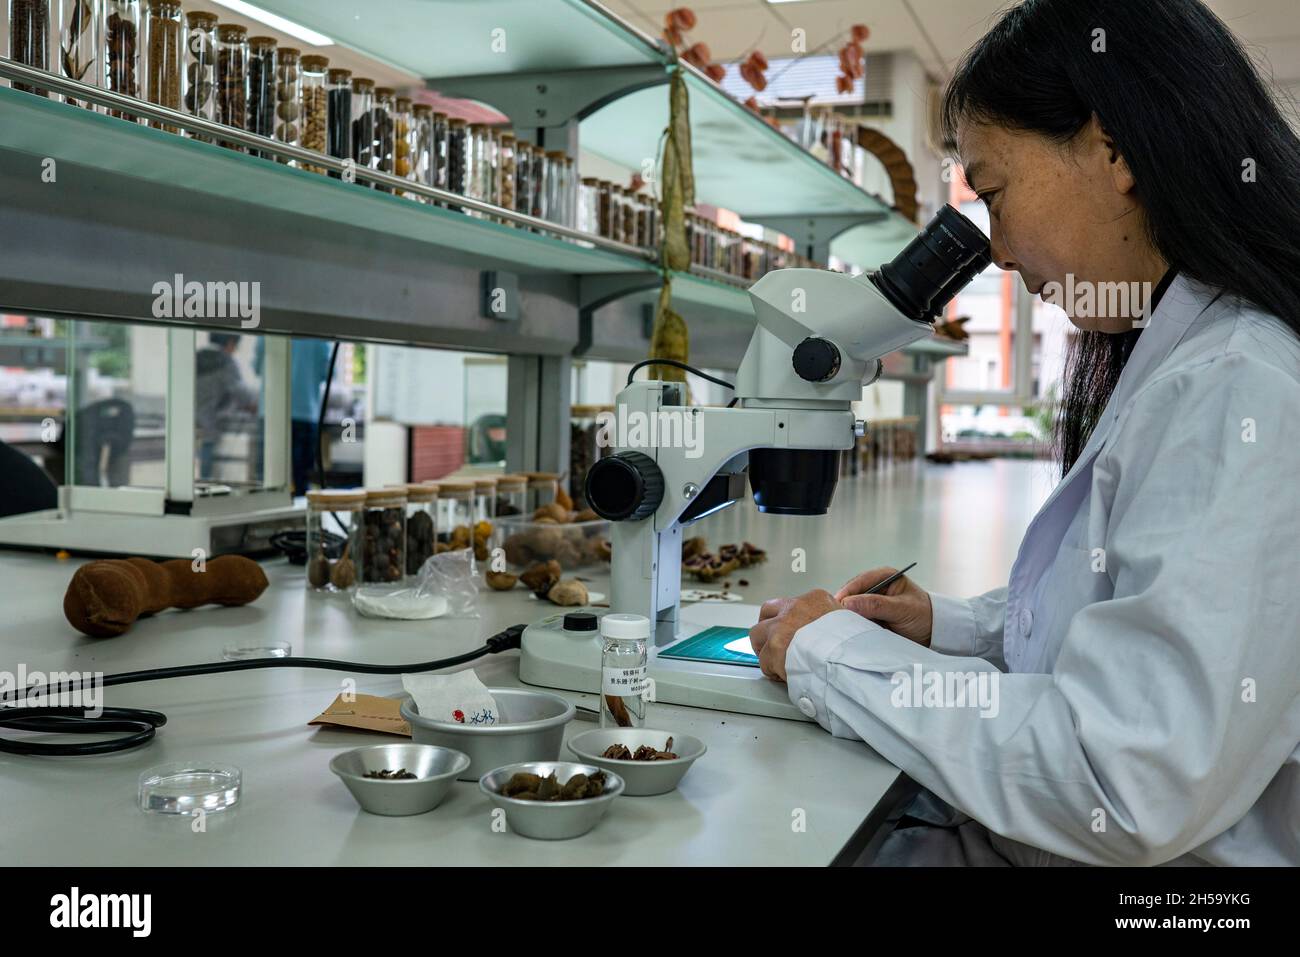 (211108) -- KUNMING, Nov. 8, 2021 (Xinhua) -- A researcher studies seed morphology through a microscope at the Germplasm Bank of Wild Species in Kunming, southwest China's Yunnan Province, Oct. 20, 2021. The Germplasm Bank of Wild Species, located in the northern suburb of Kunming, capital of China's Yunnan Province, is a 'Noah's Ark' for tens of thousands of species, including rare Davidia involucrata, Taxus himalayana and Rhinopithecus bieti. The Germplasm Bank of Wild Species has preserved 85,046 accessions from 10,601 species of wild plants, accounting for 36 percent of the number of C Stock Photo